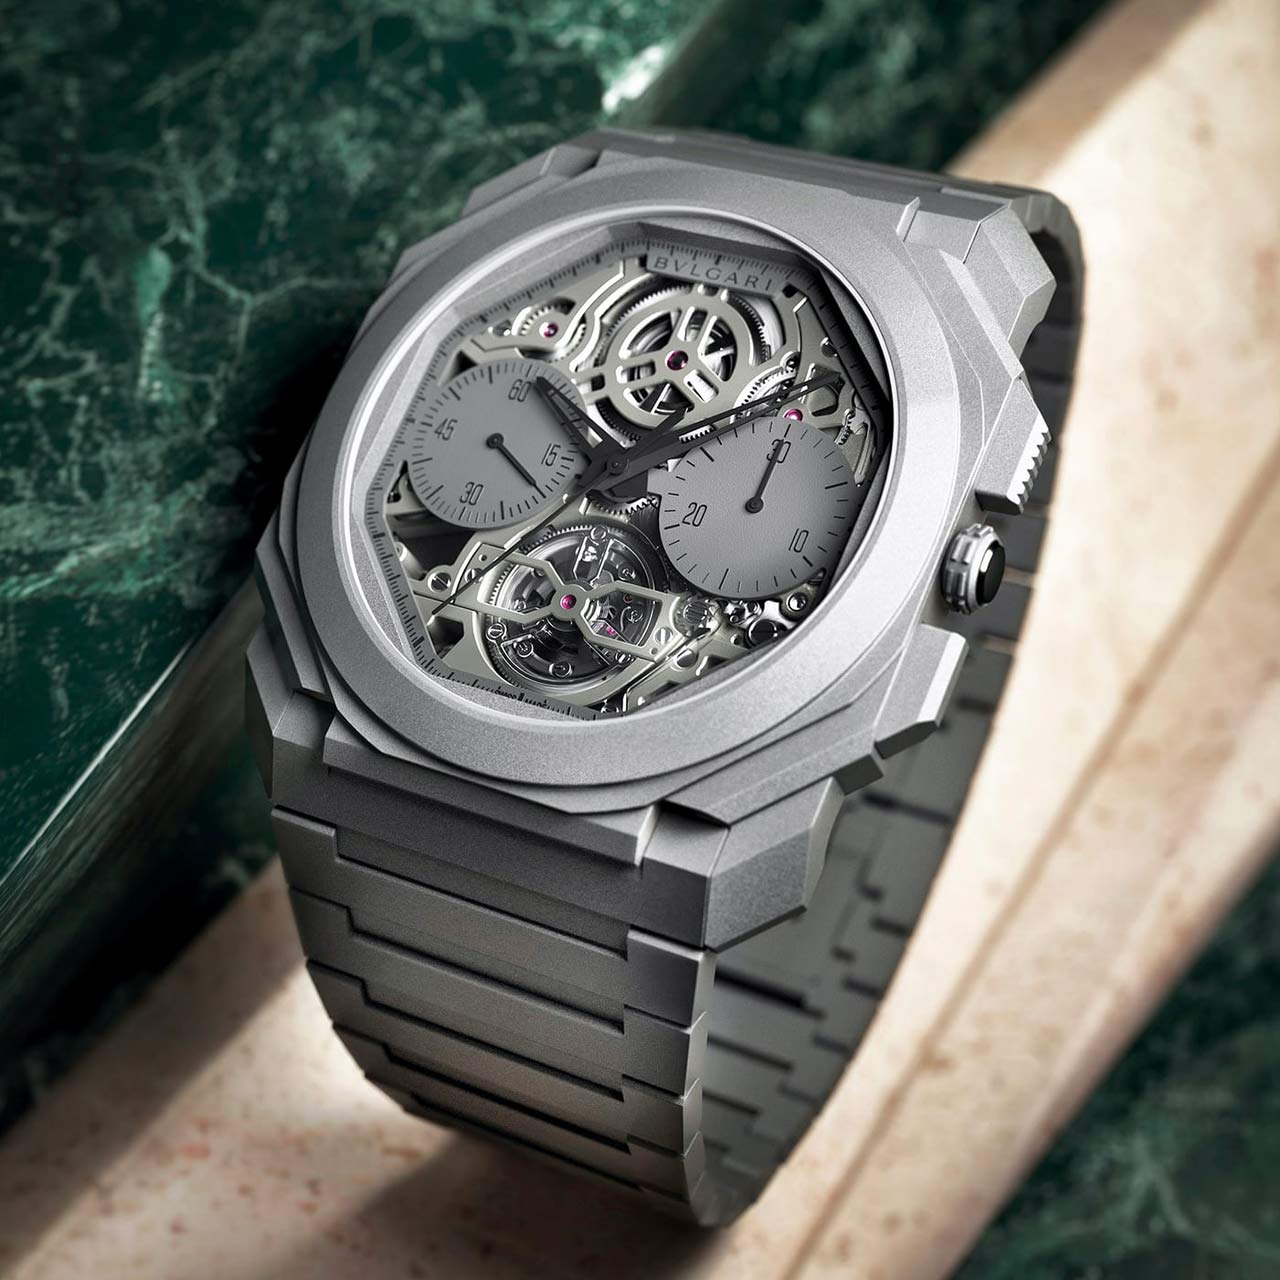 INTRODUCING: The breathtaking and brutally slim Bulgari Octo Finissimo  Tourbillon Chronograph Skeleton Automatic - Time and Tide Watches